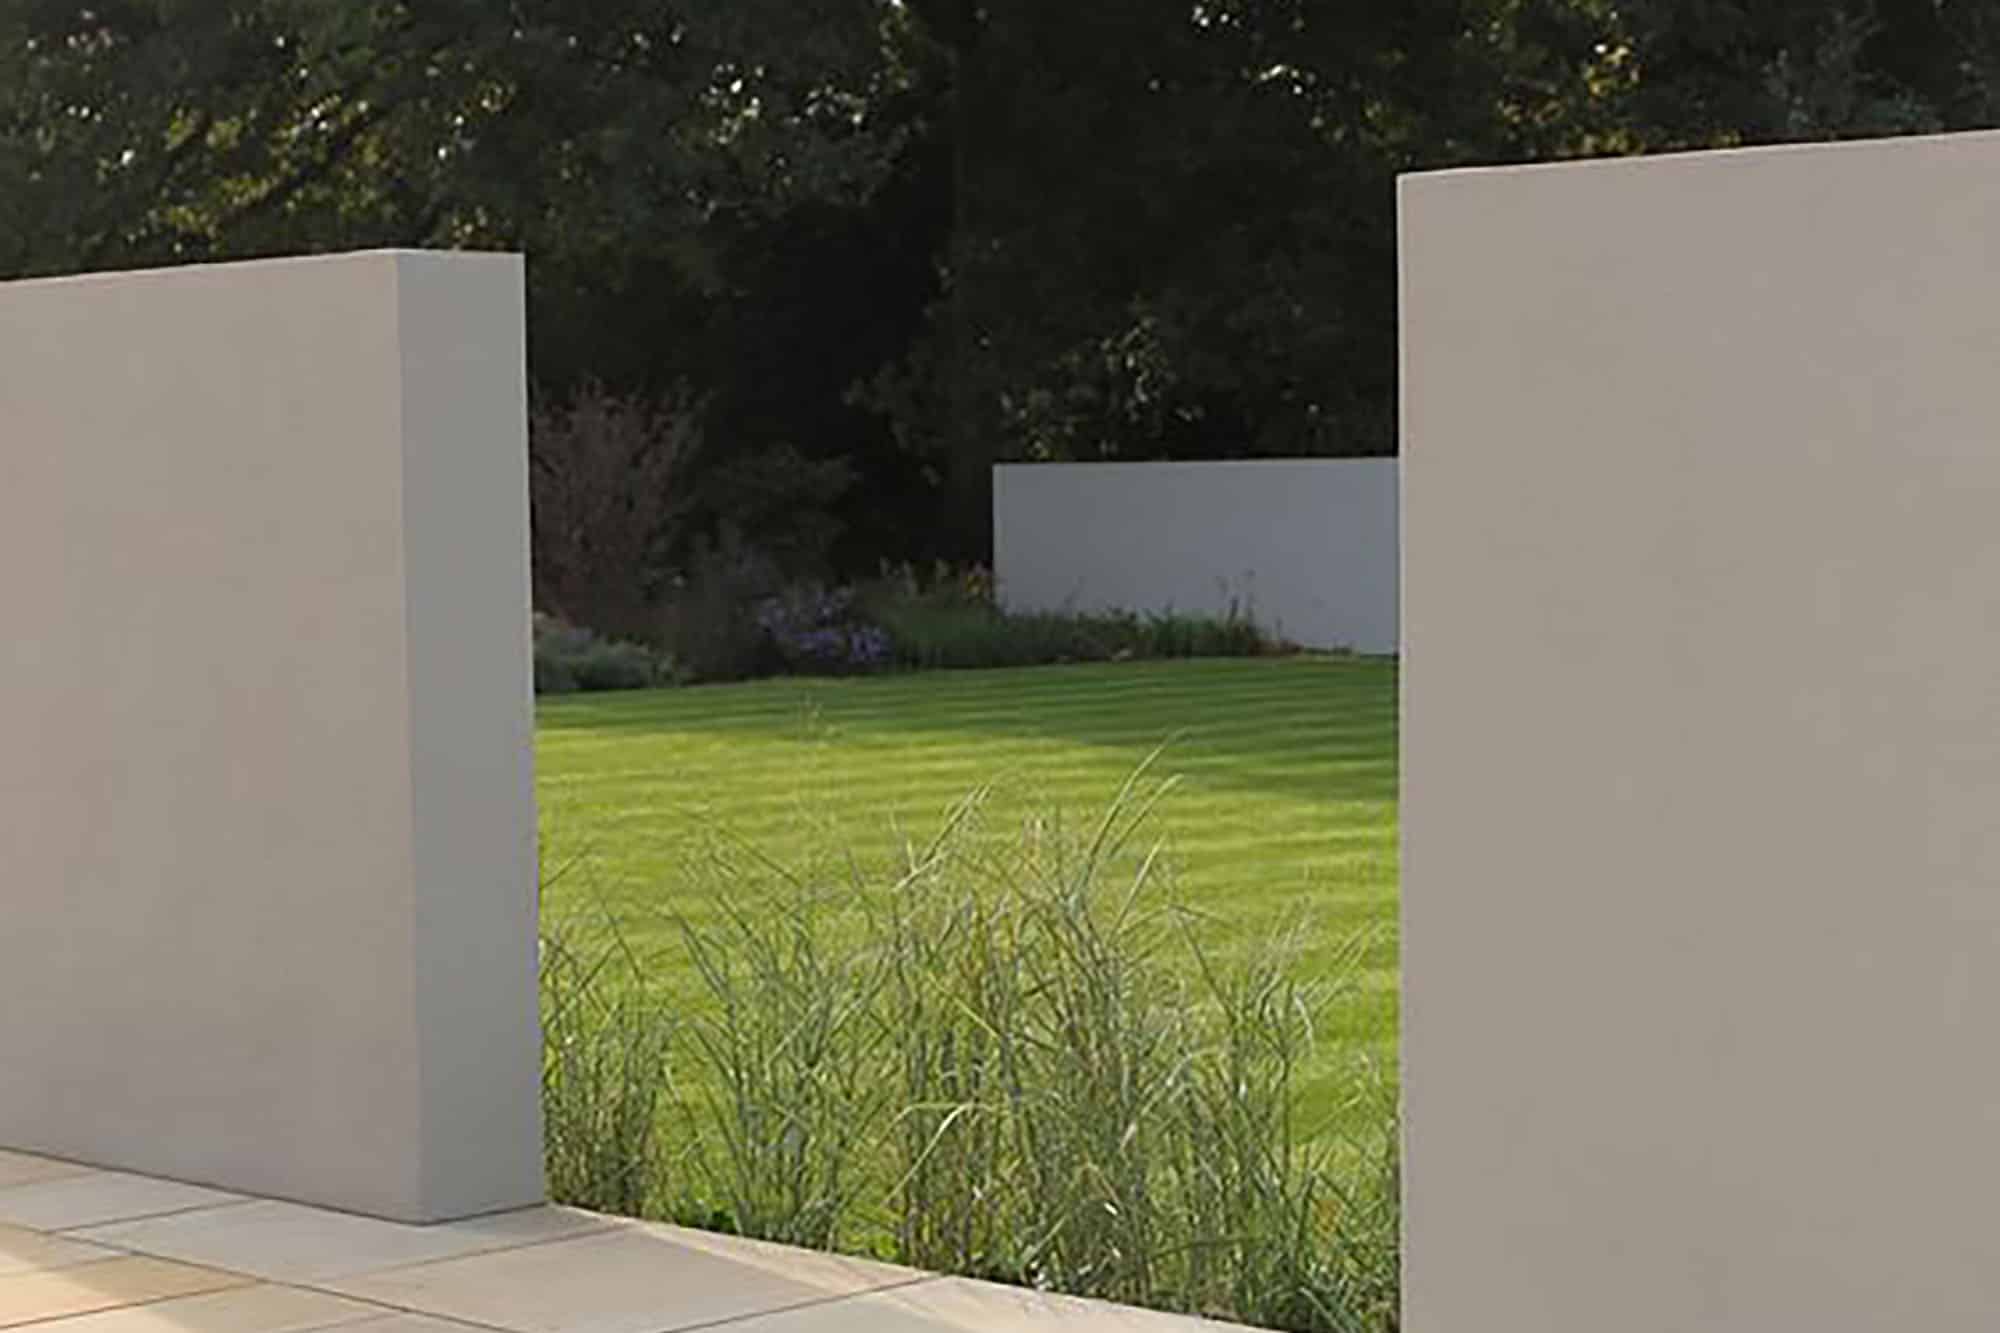 Large polymer off white garden wall